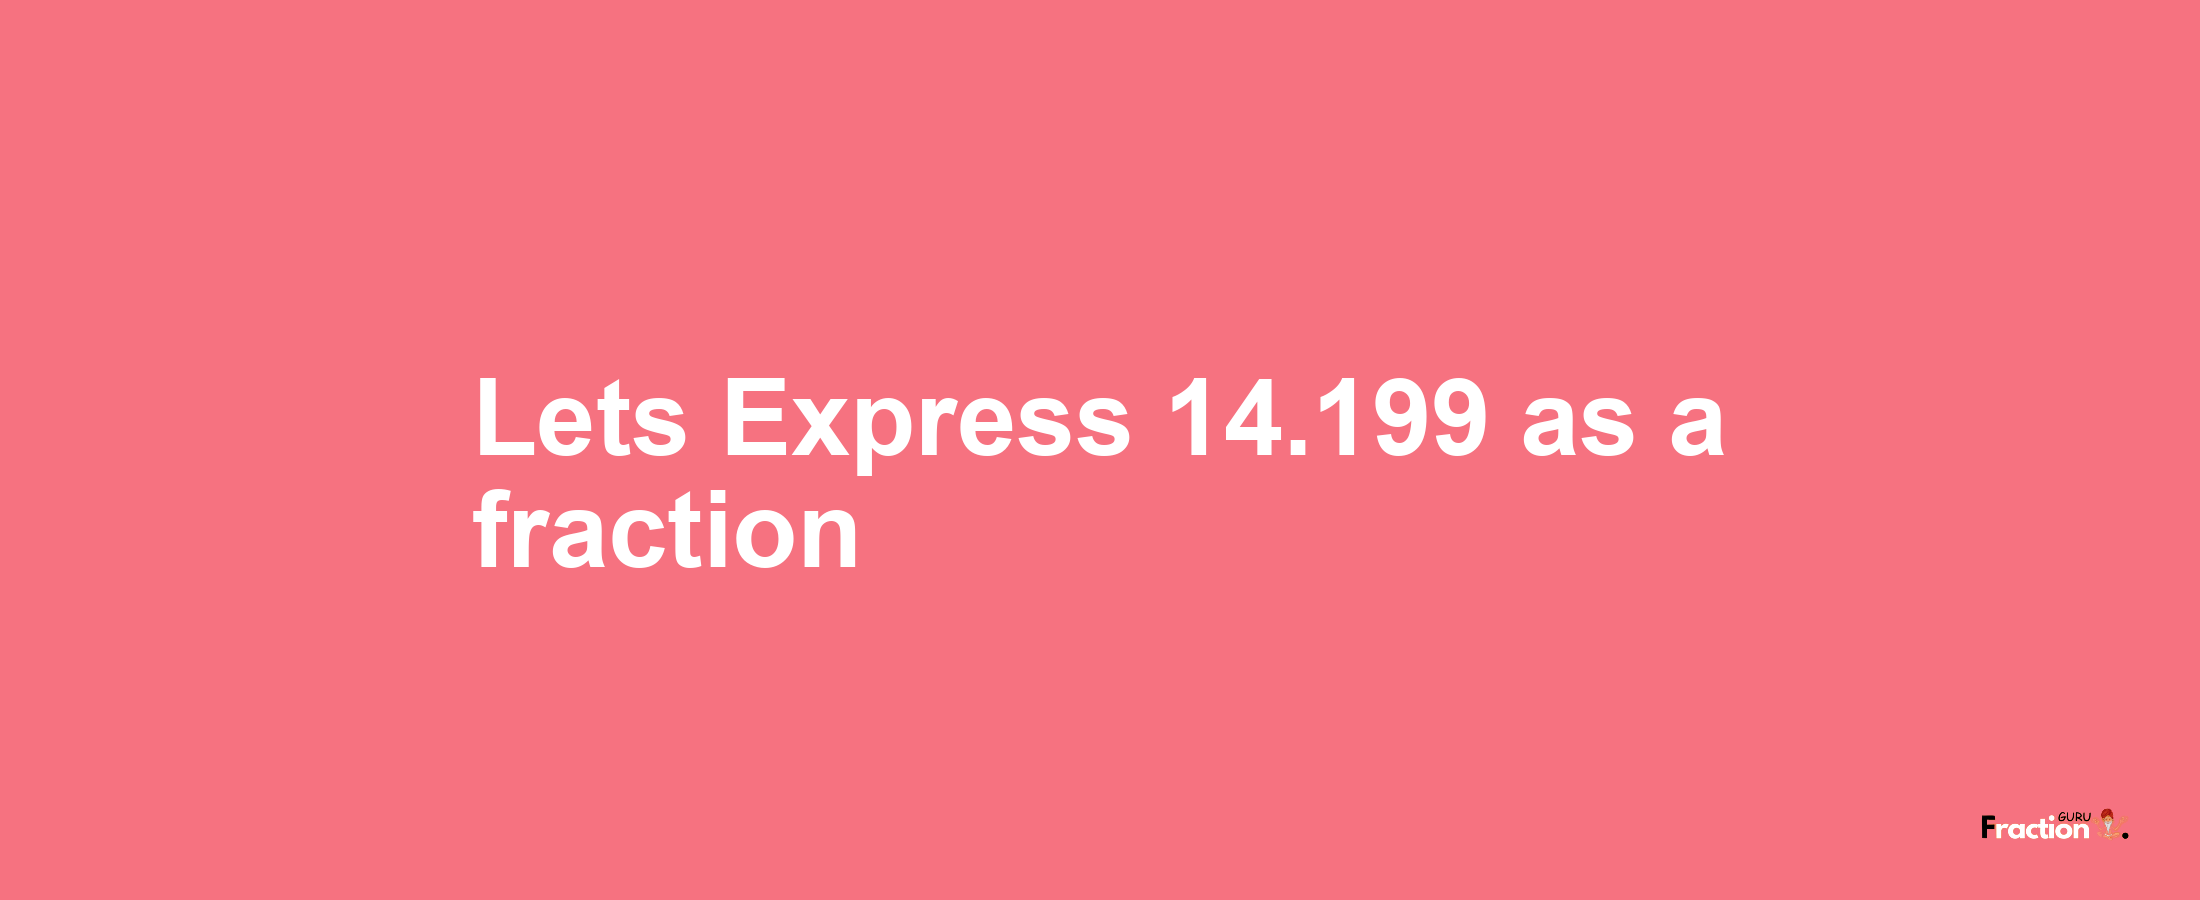 Lets Express 14.199 as afraction